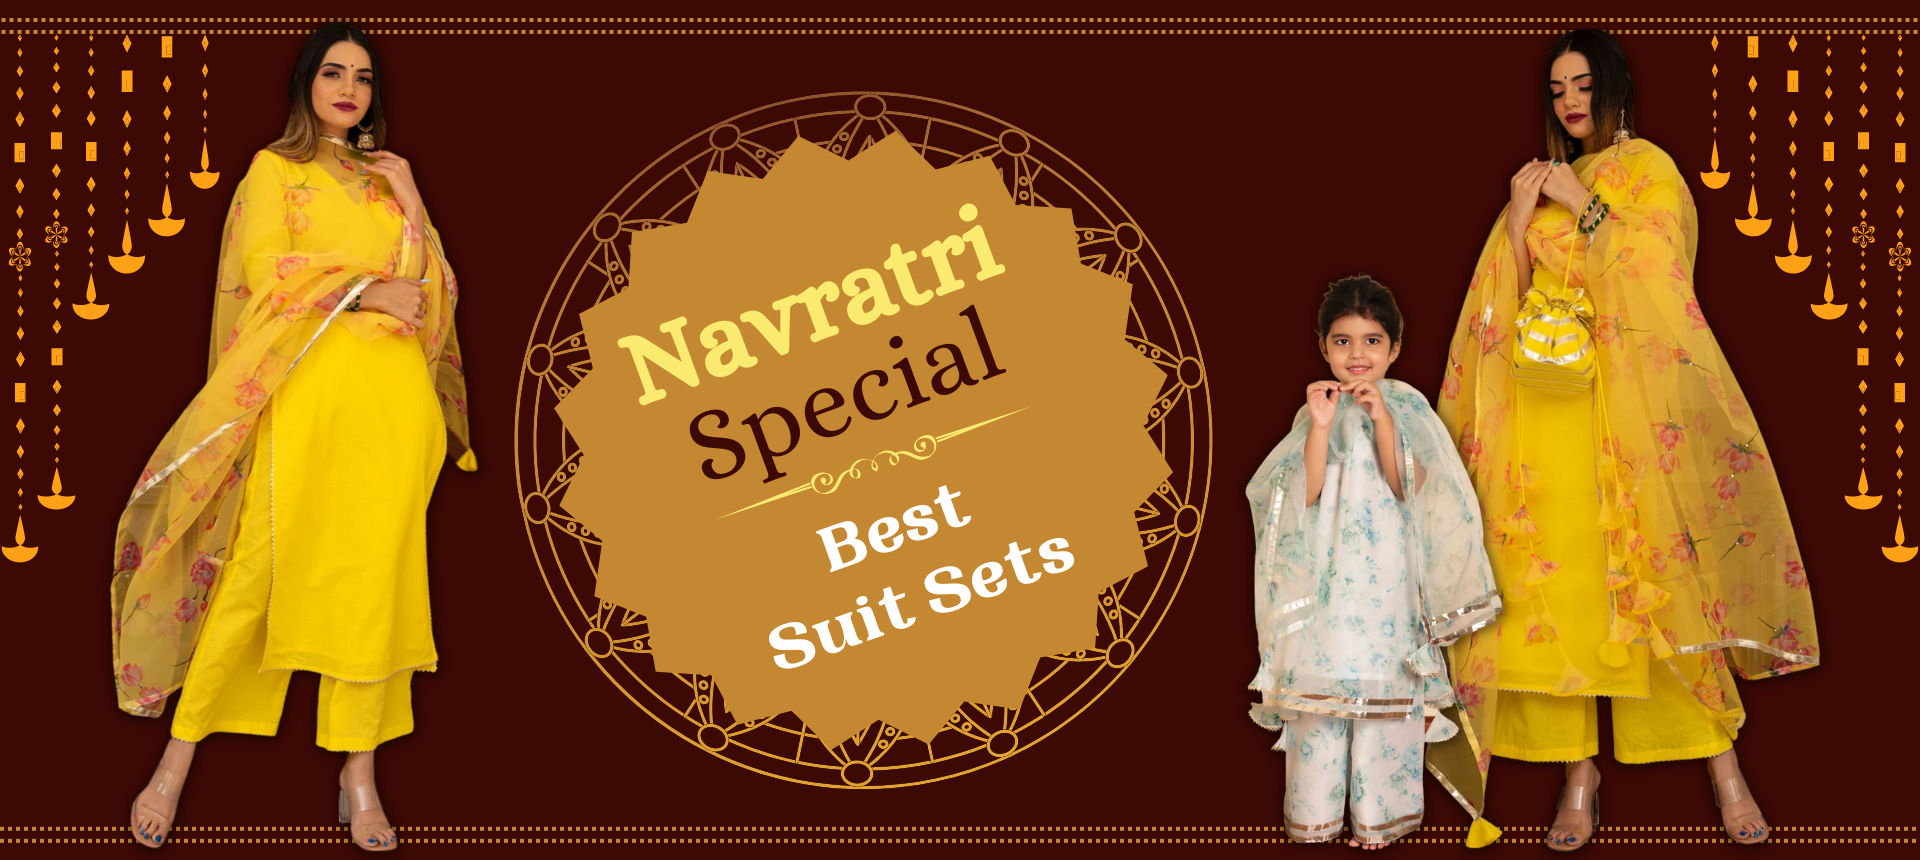 Be Navratri Ready with These Best Women Suit Sets